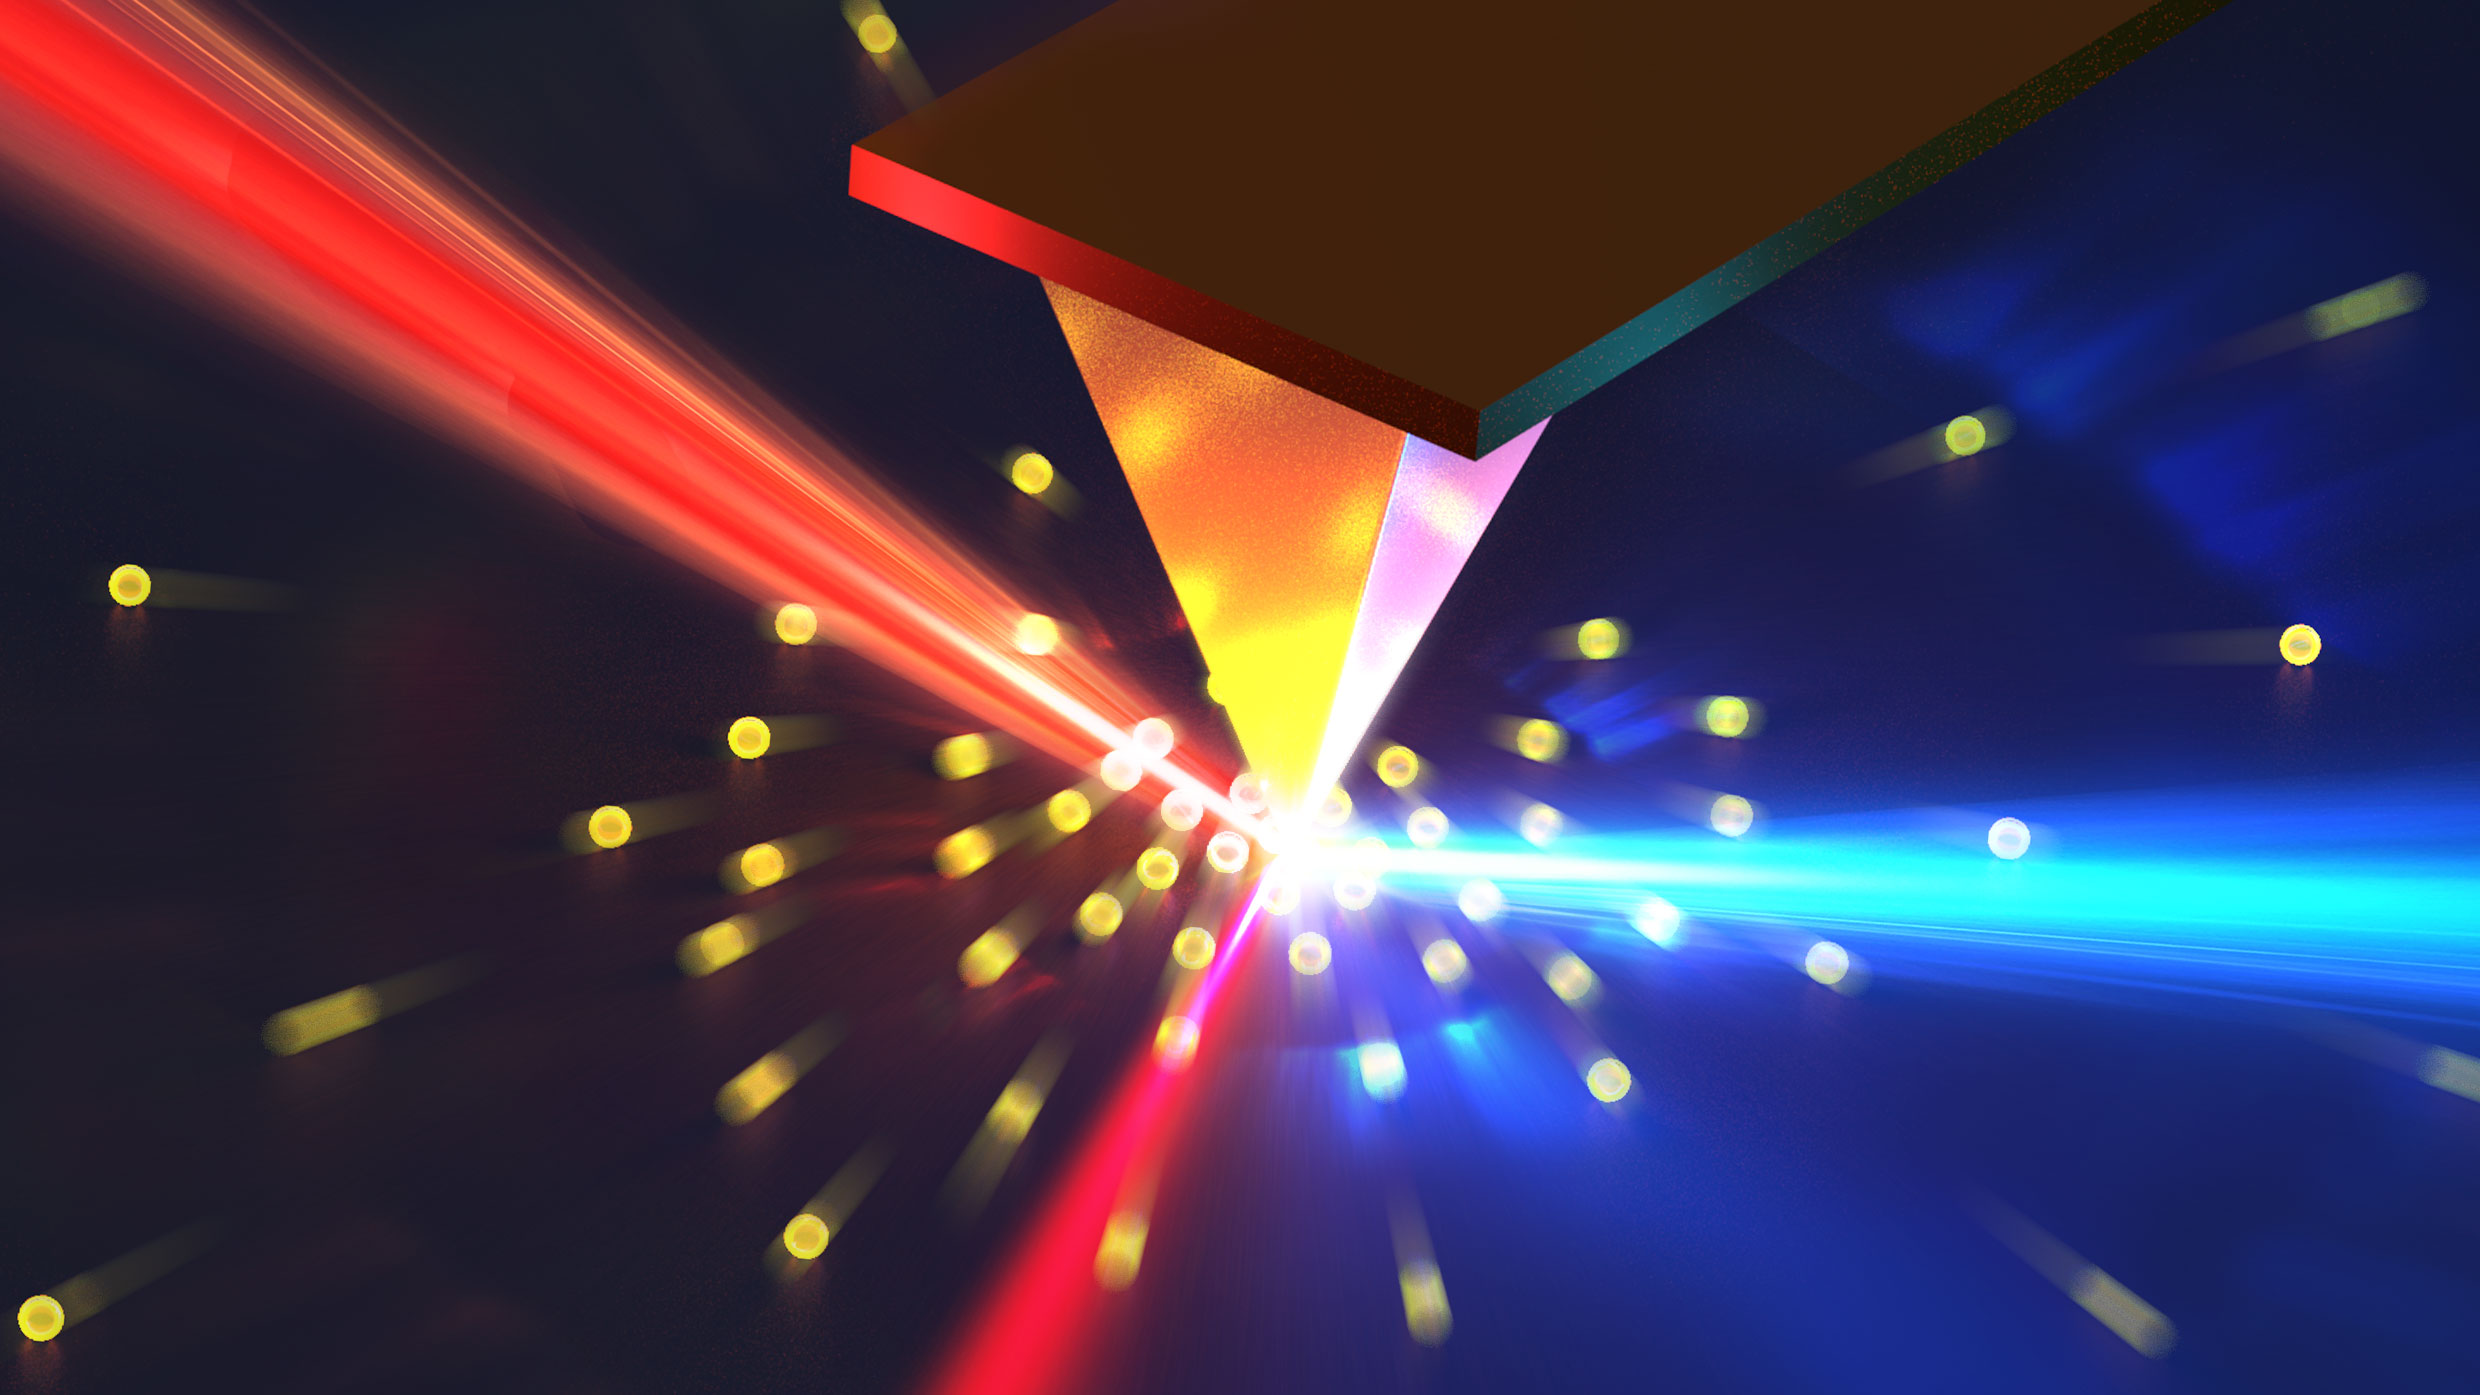 Optical nanoscopy uses laser beams to strike free electrons, scattering light and providing insights into electron distribution and dynamics within semiconductor materials